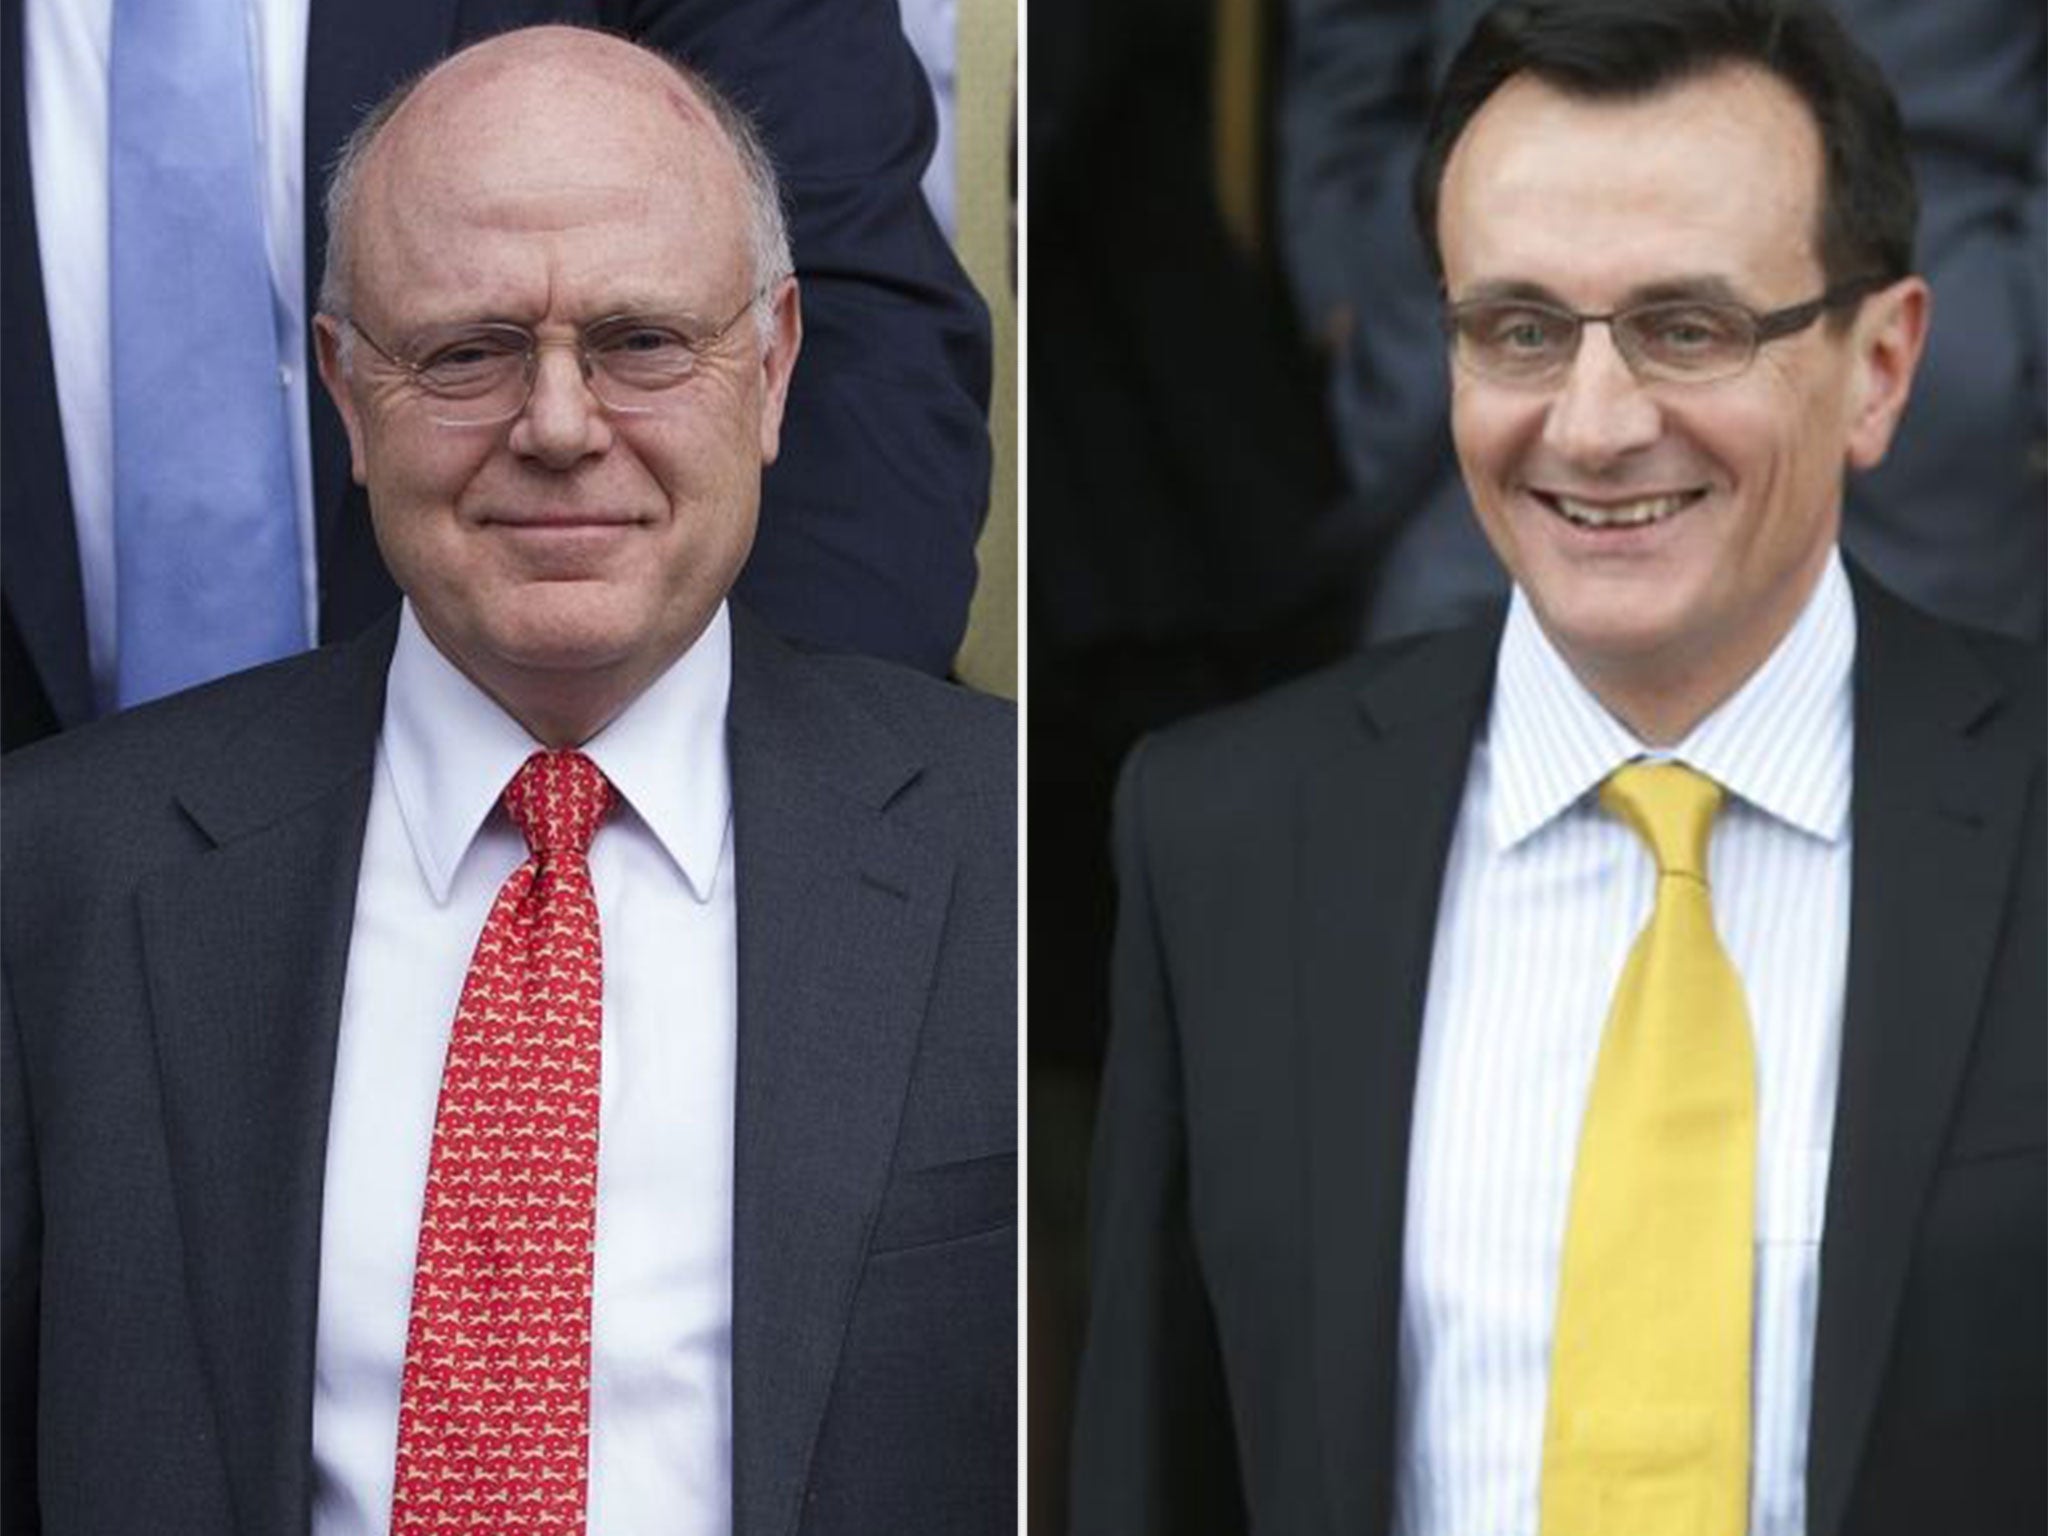 Ian Read, chairman and chief executive of US drugs giant Pfizer, left, and, Pascal Soriot, chief executive of AstraZeneca